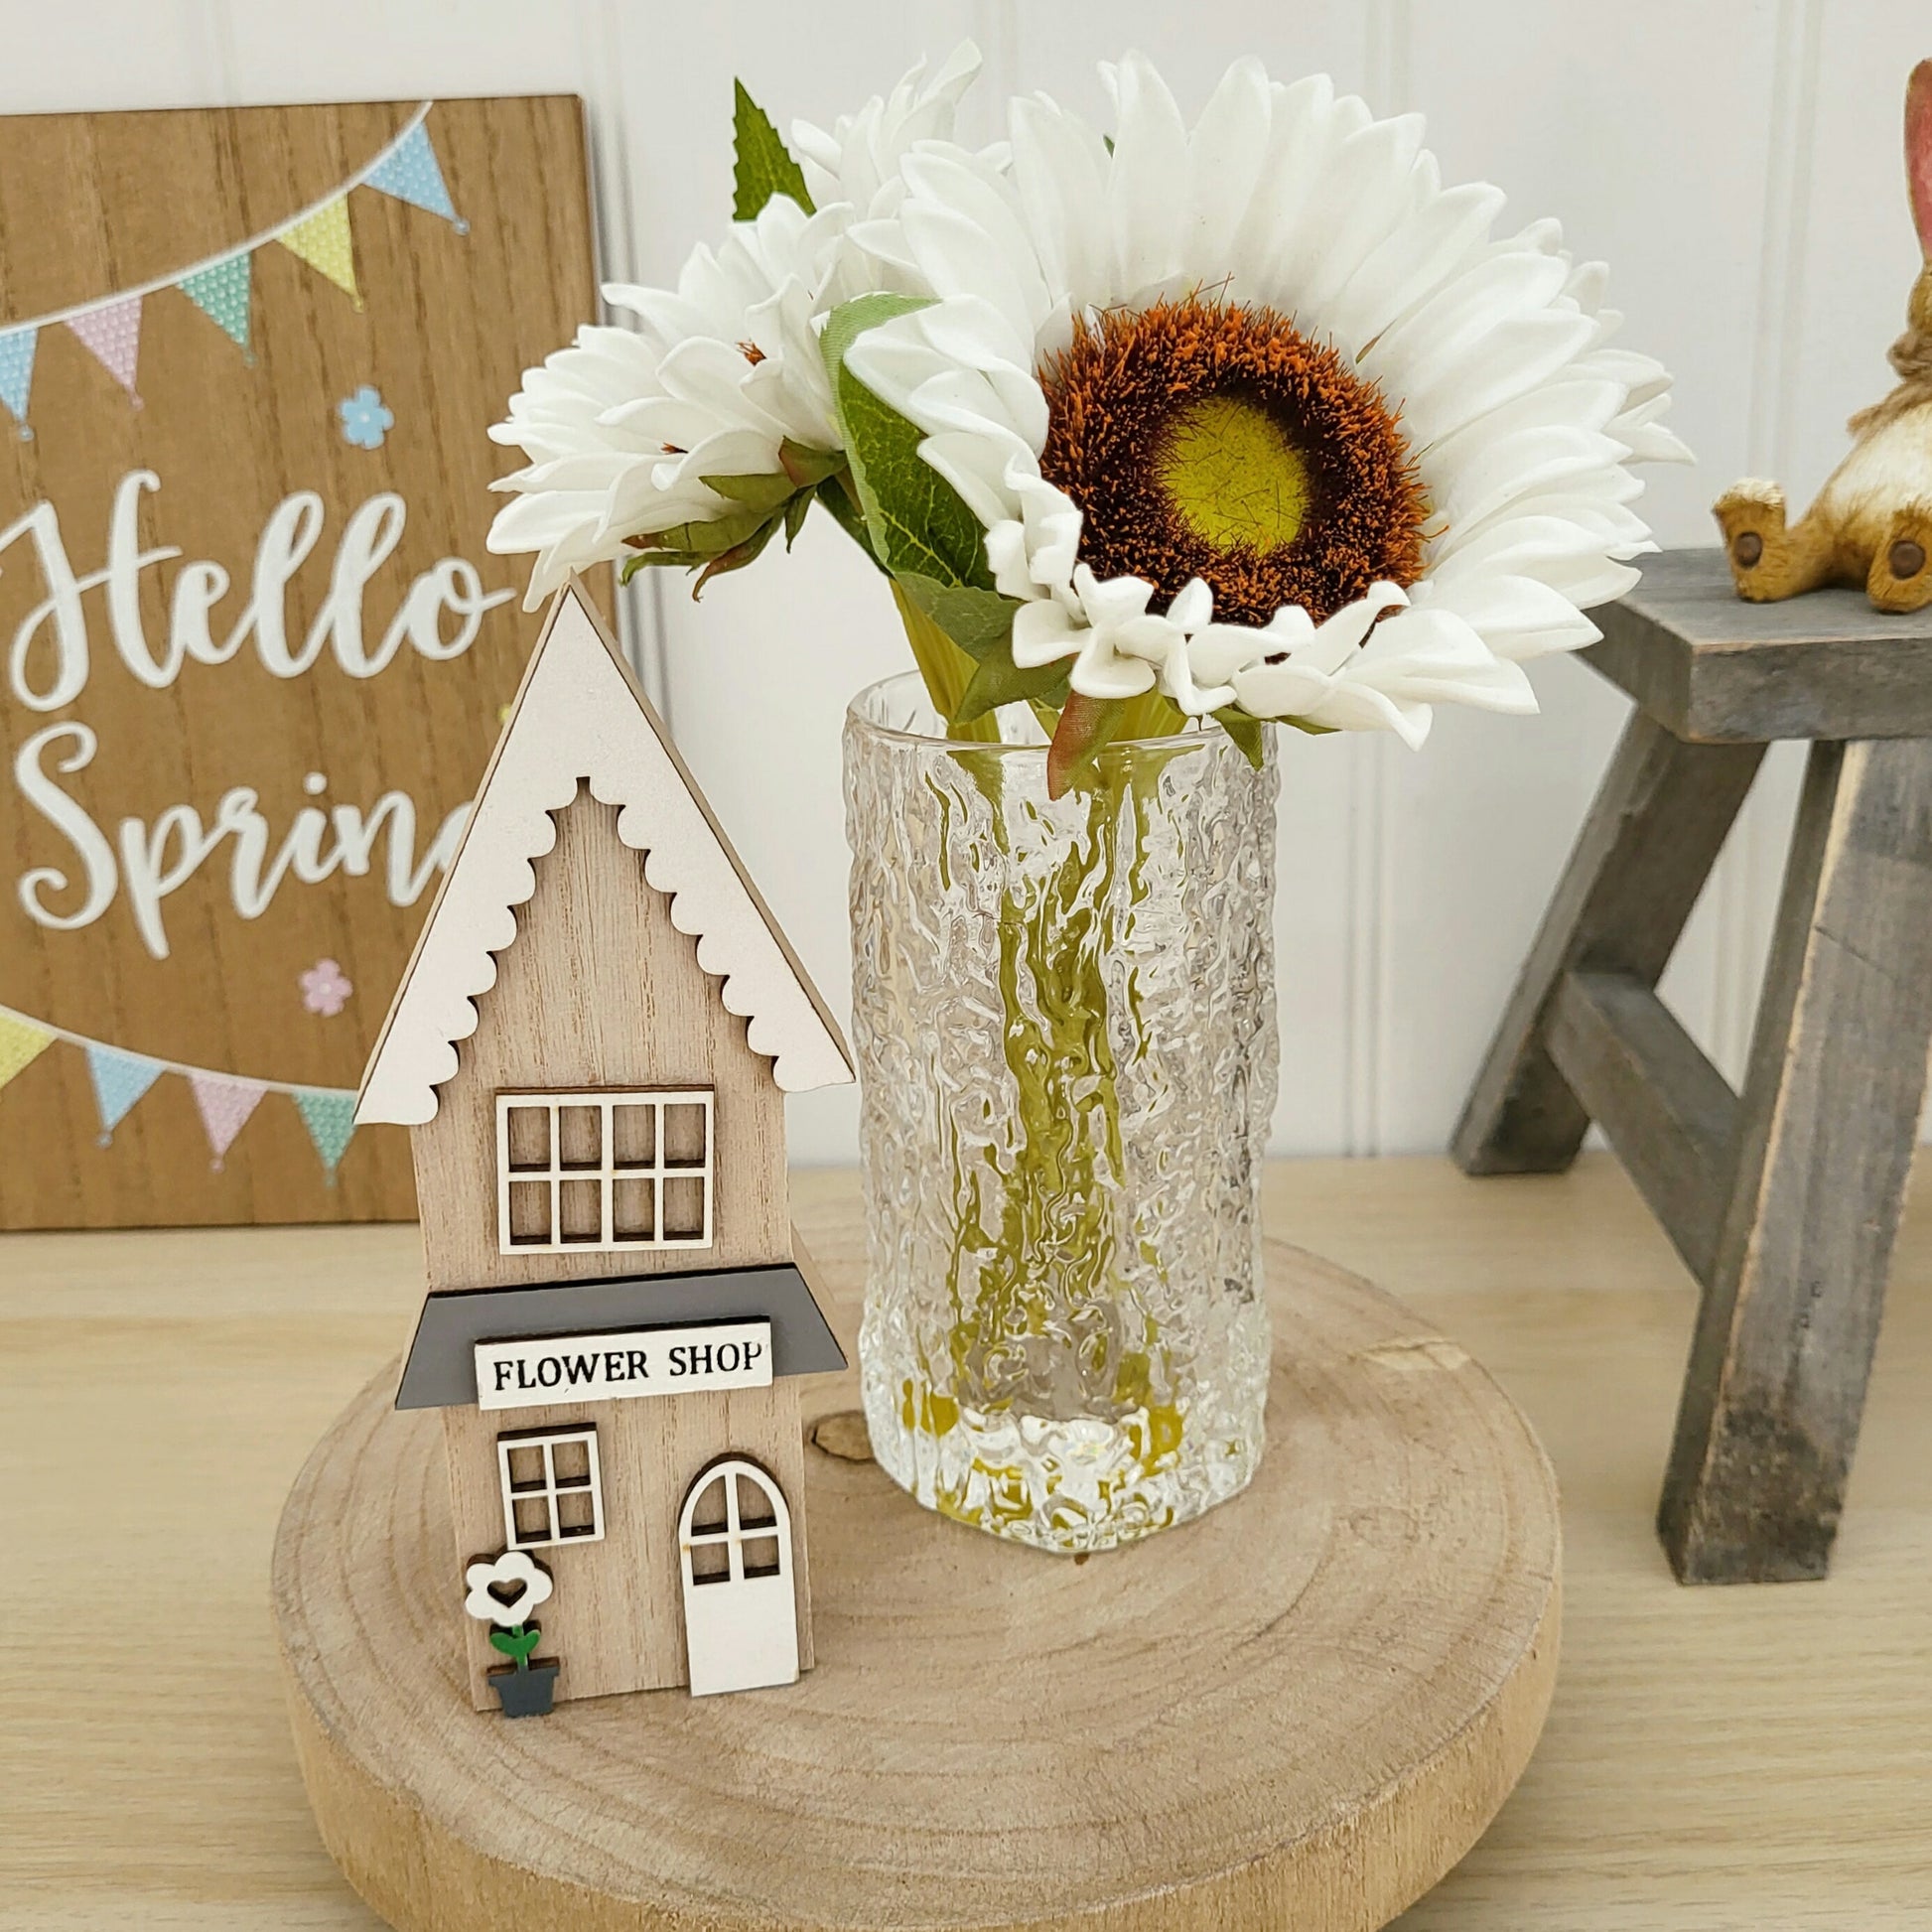 A wooden house ornament in a flower shop style displayed on a wooden board with some sunflowerd in a vase